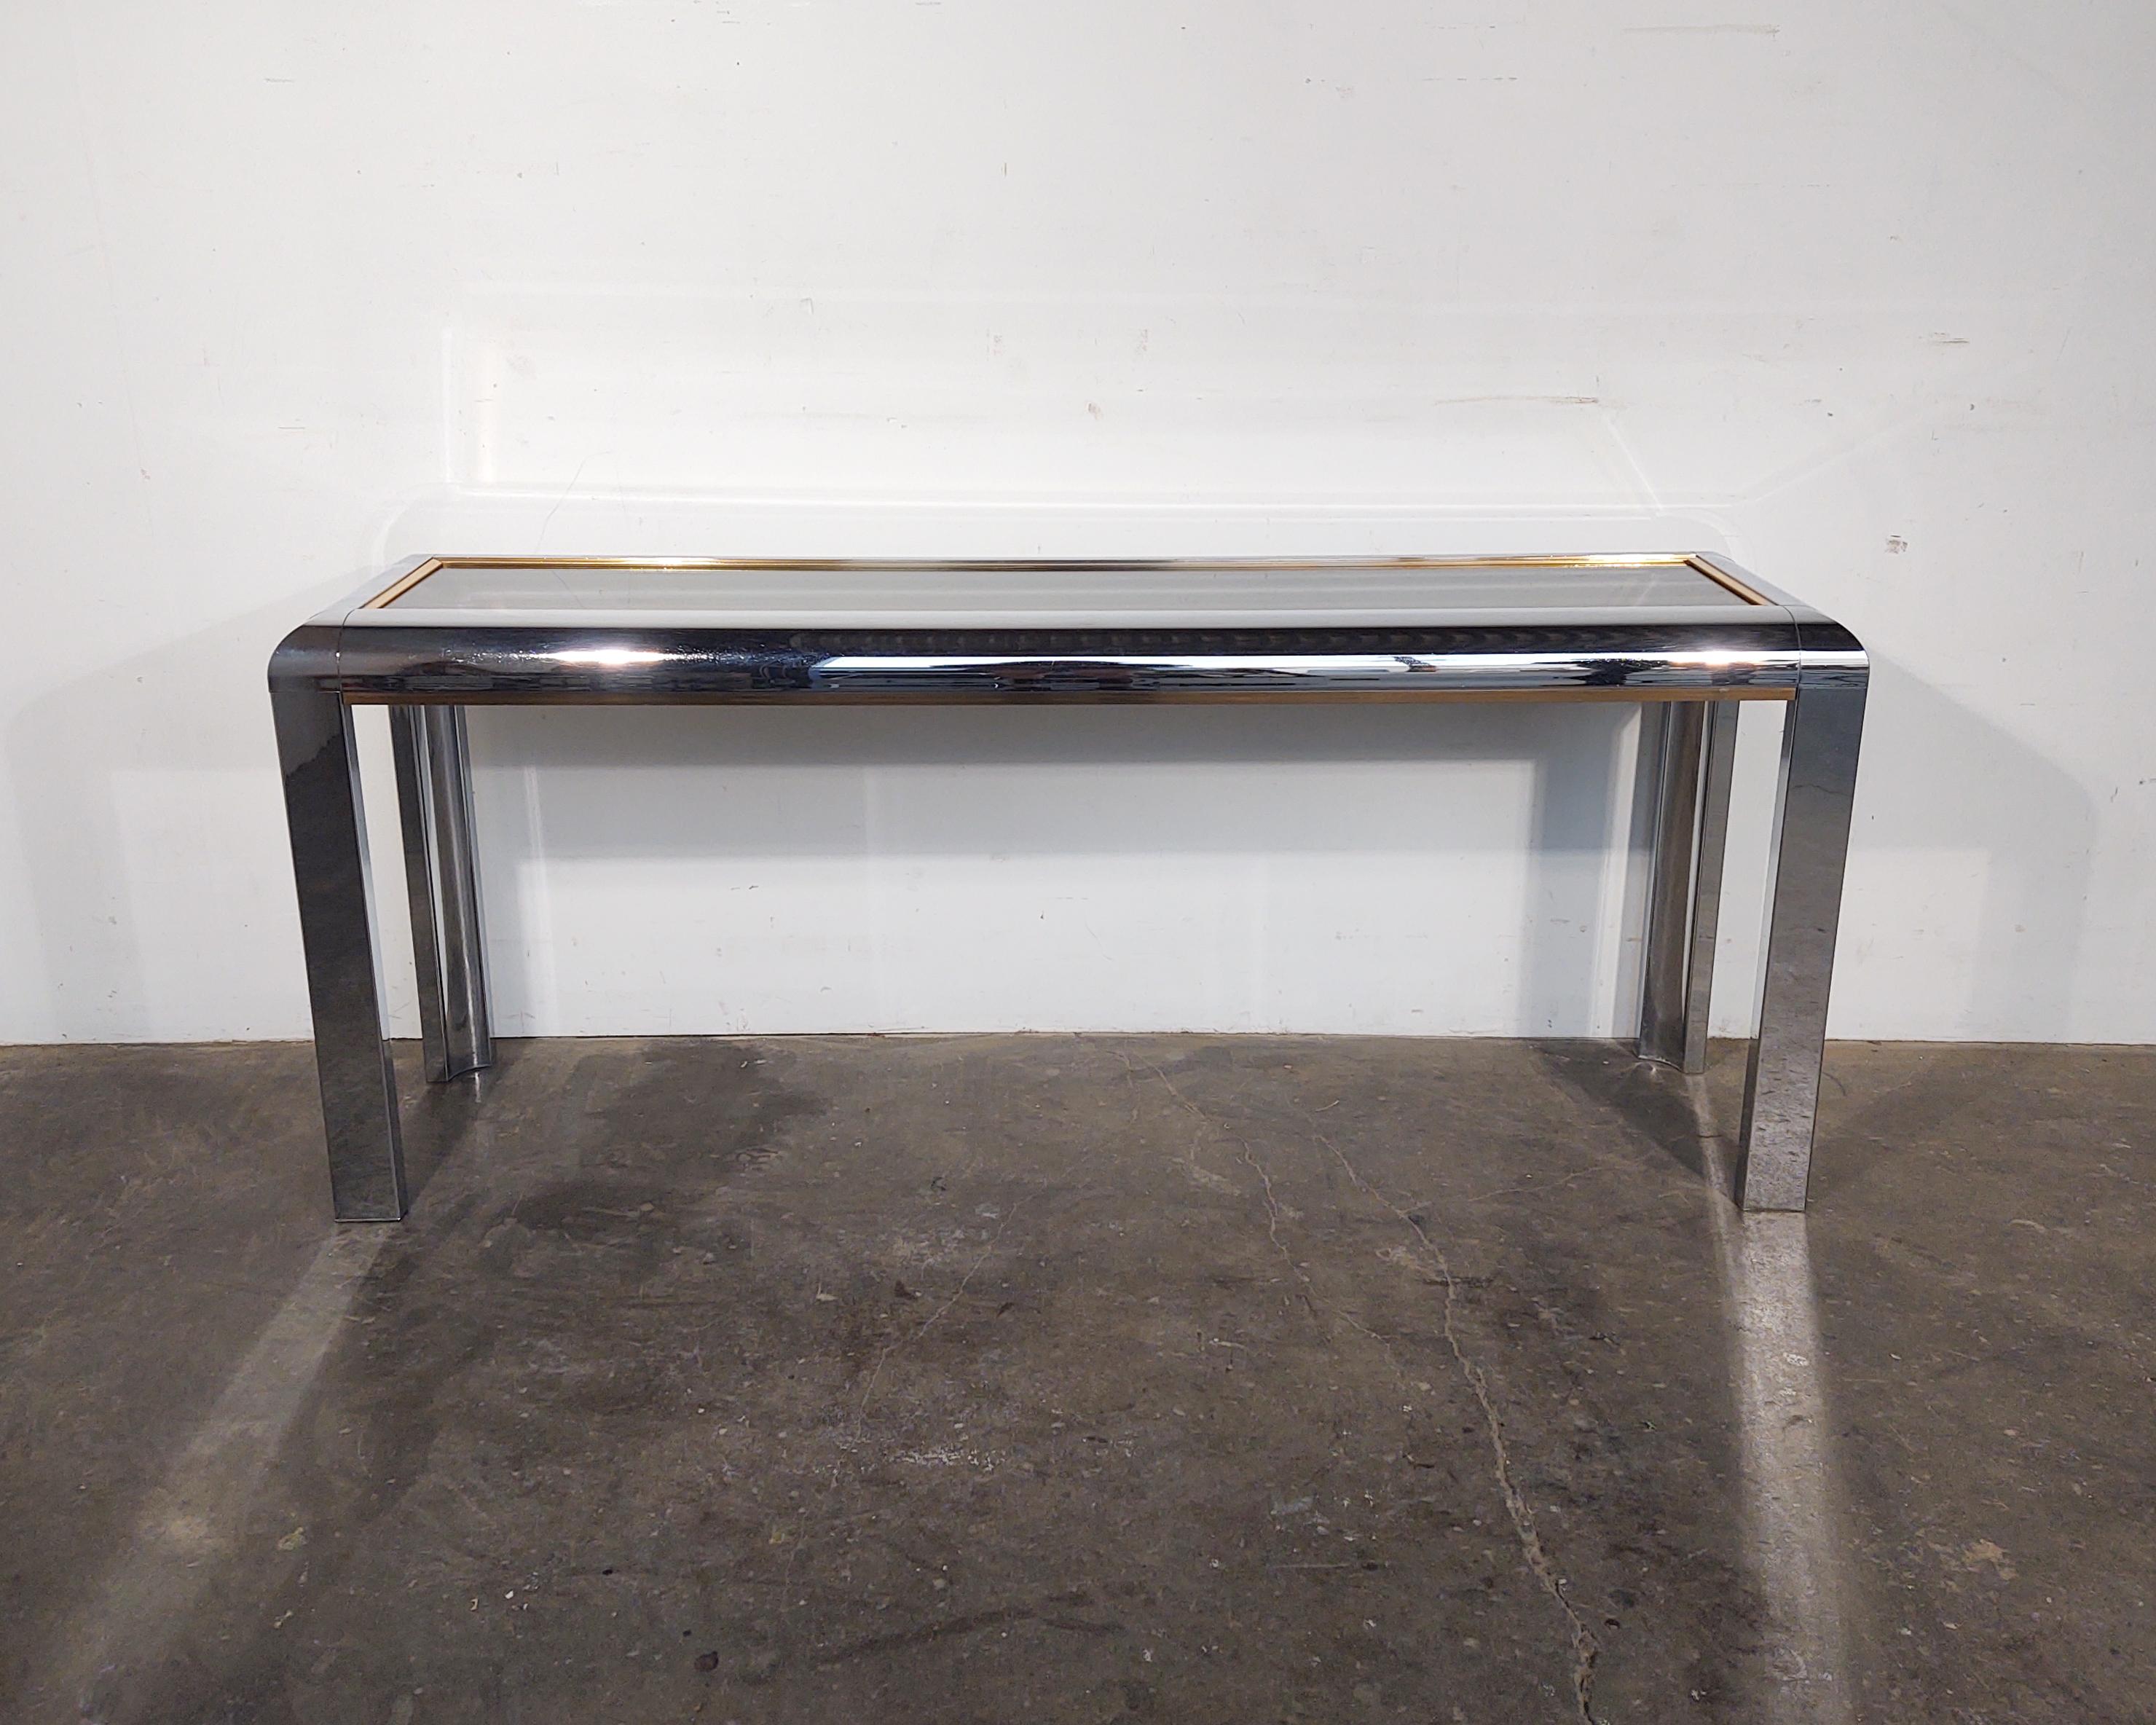 Minimal console / media table with chrome frame and casters circa 1970s designed by Milo Baughman. Thick glass top and lower shelf. Glass is removable.